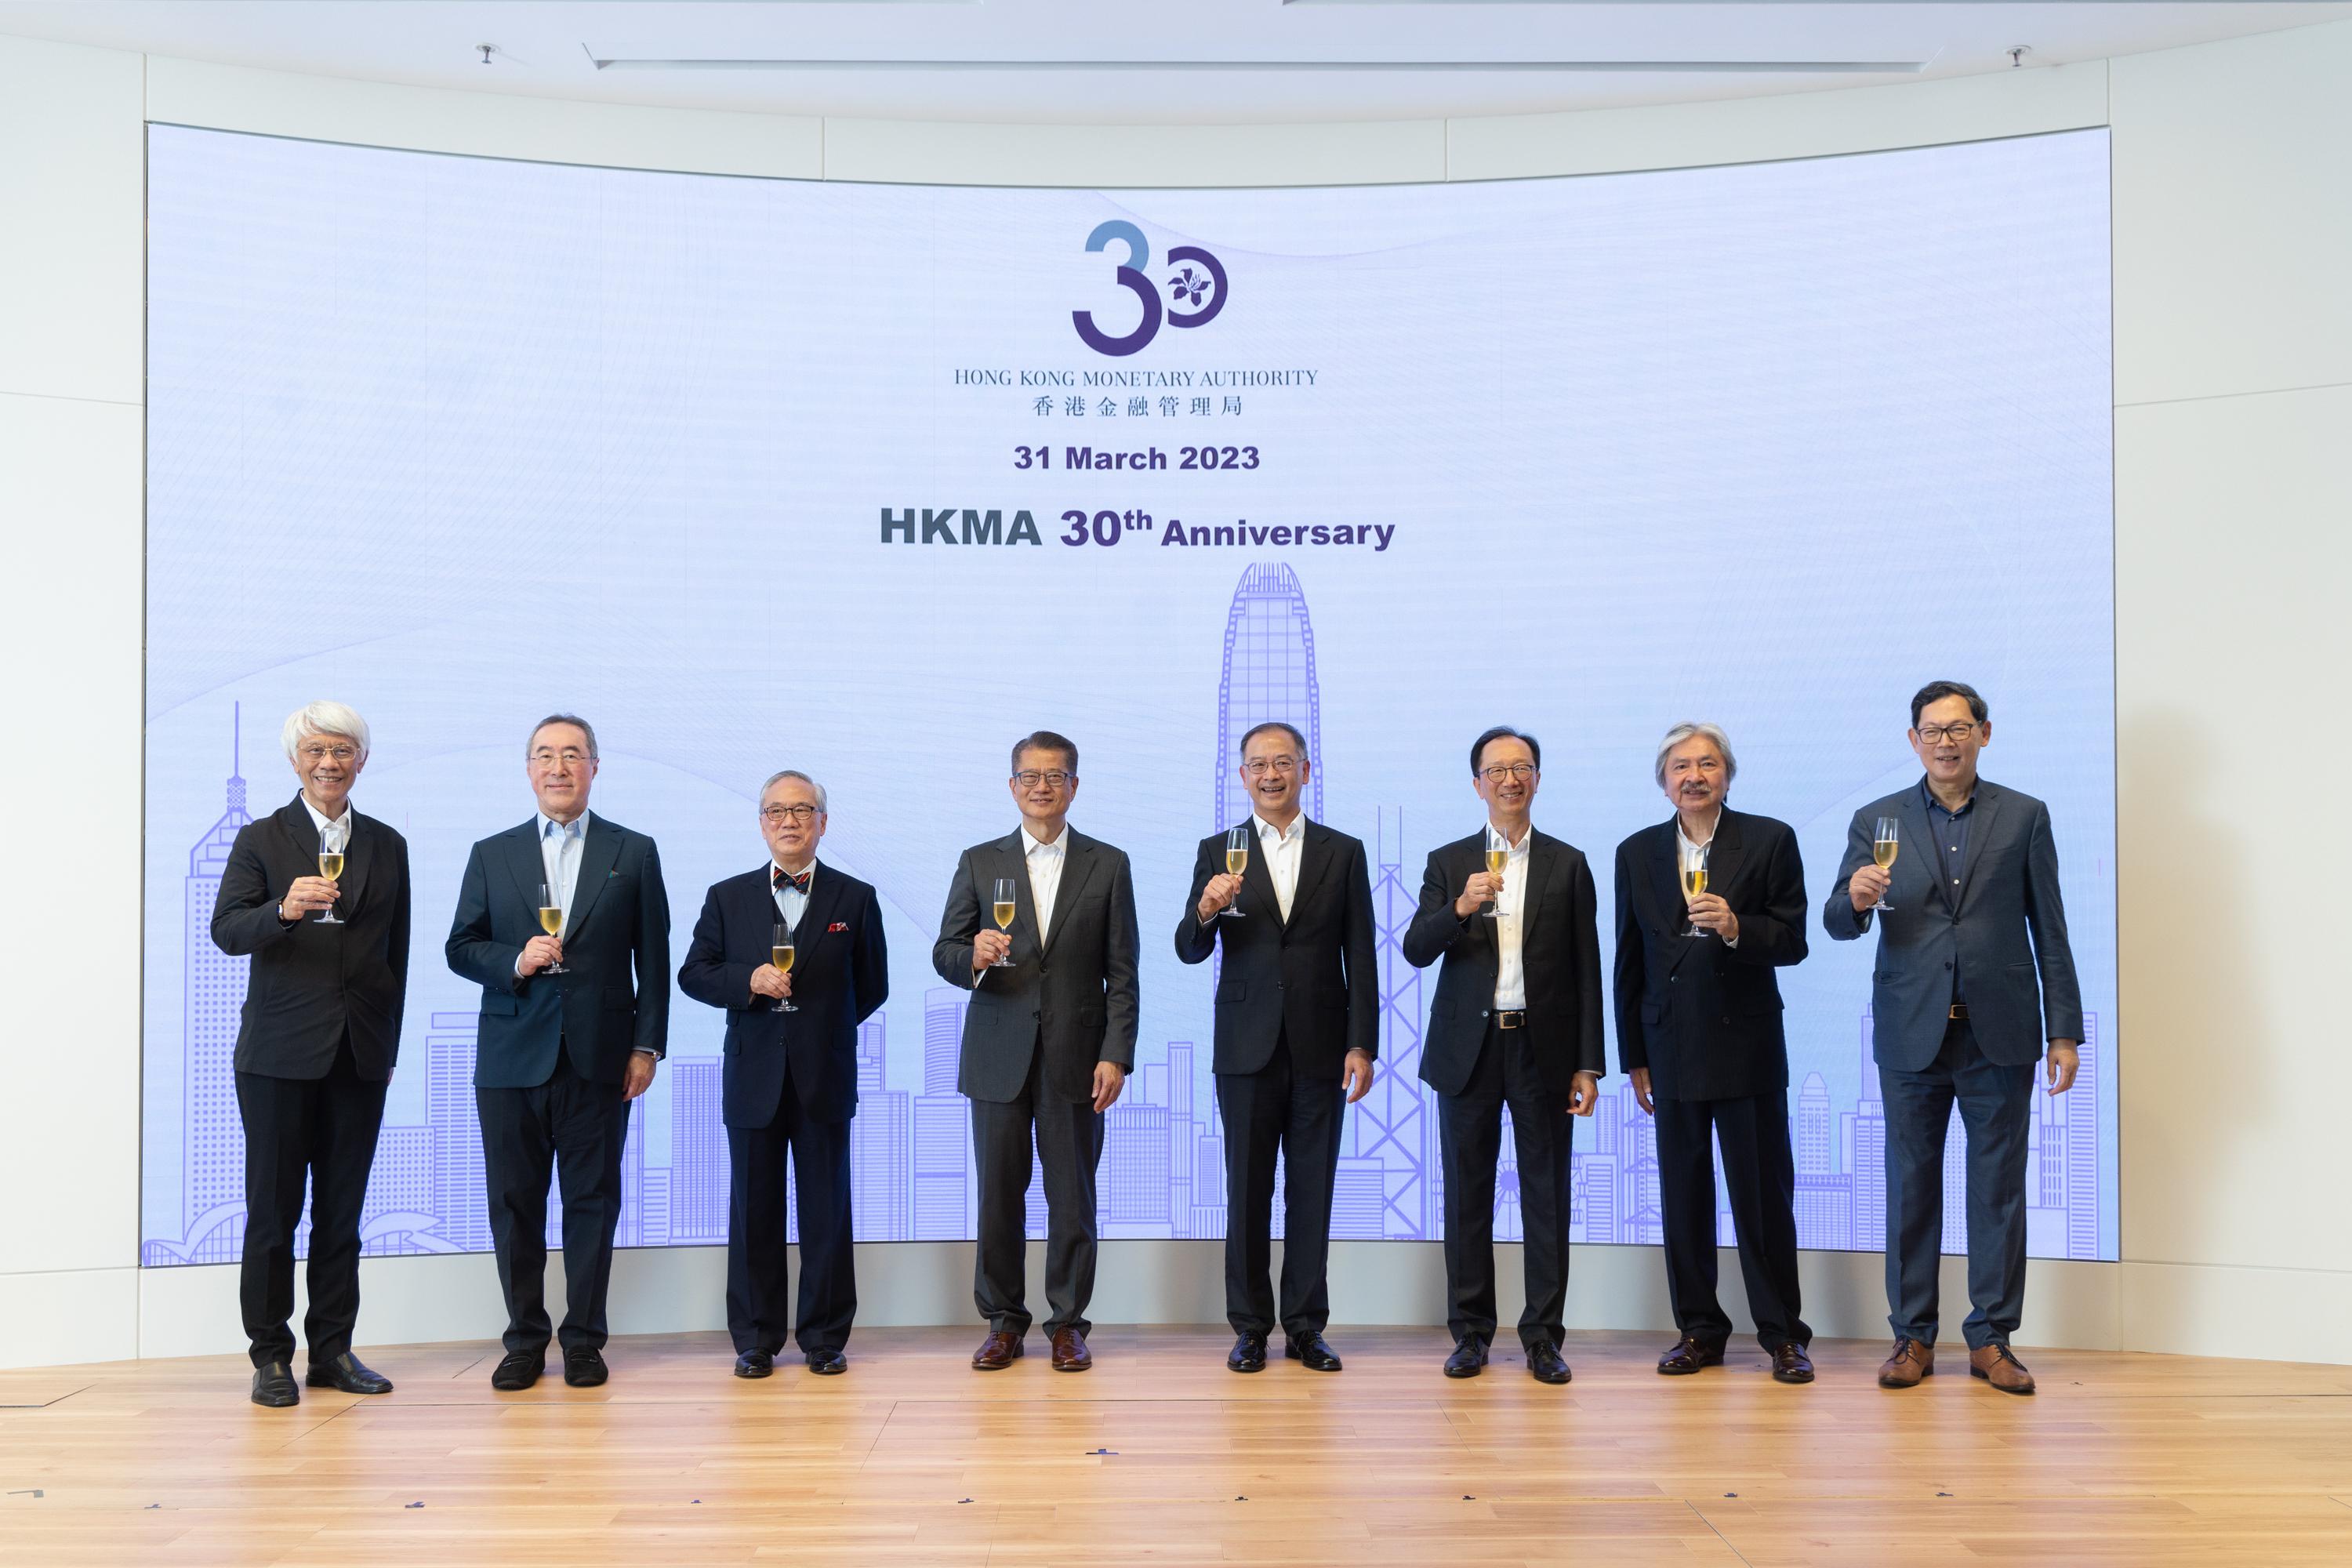 The Financial Secretary, Mr Paul Chan, attended the Hong Kong Monetary Authority (HKMA) 30th Anniversary Reception today (March 31). Photo shows (from left) former Chief Executive of the HKMA Mr Joseph Yam; former Chief Secretary for Administration Mr Henry Tang; former Chief Executive Mr Donald Tsang; Mr Chan; the Chief Executive of the HKMA, Mr Eddie Yue; former Financial Secretary Mr Antony Leung; former Financial Secretary Mr John Tsang, and former Chief Executive of the HKMA Mr Norman Chan, proposing a toast.